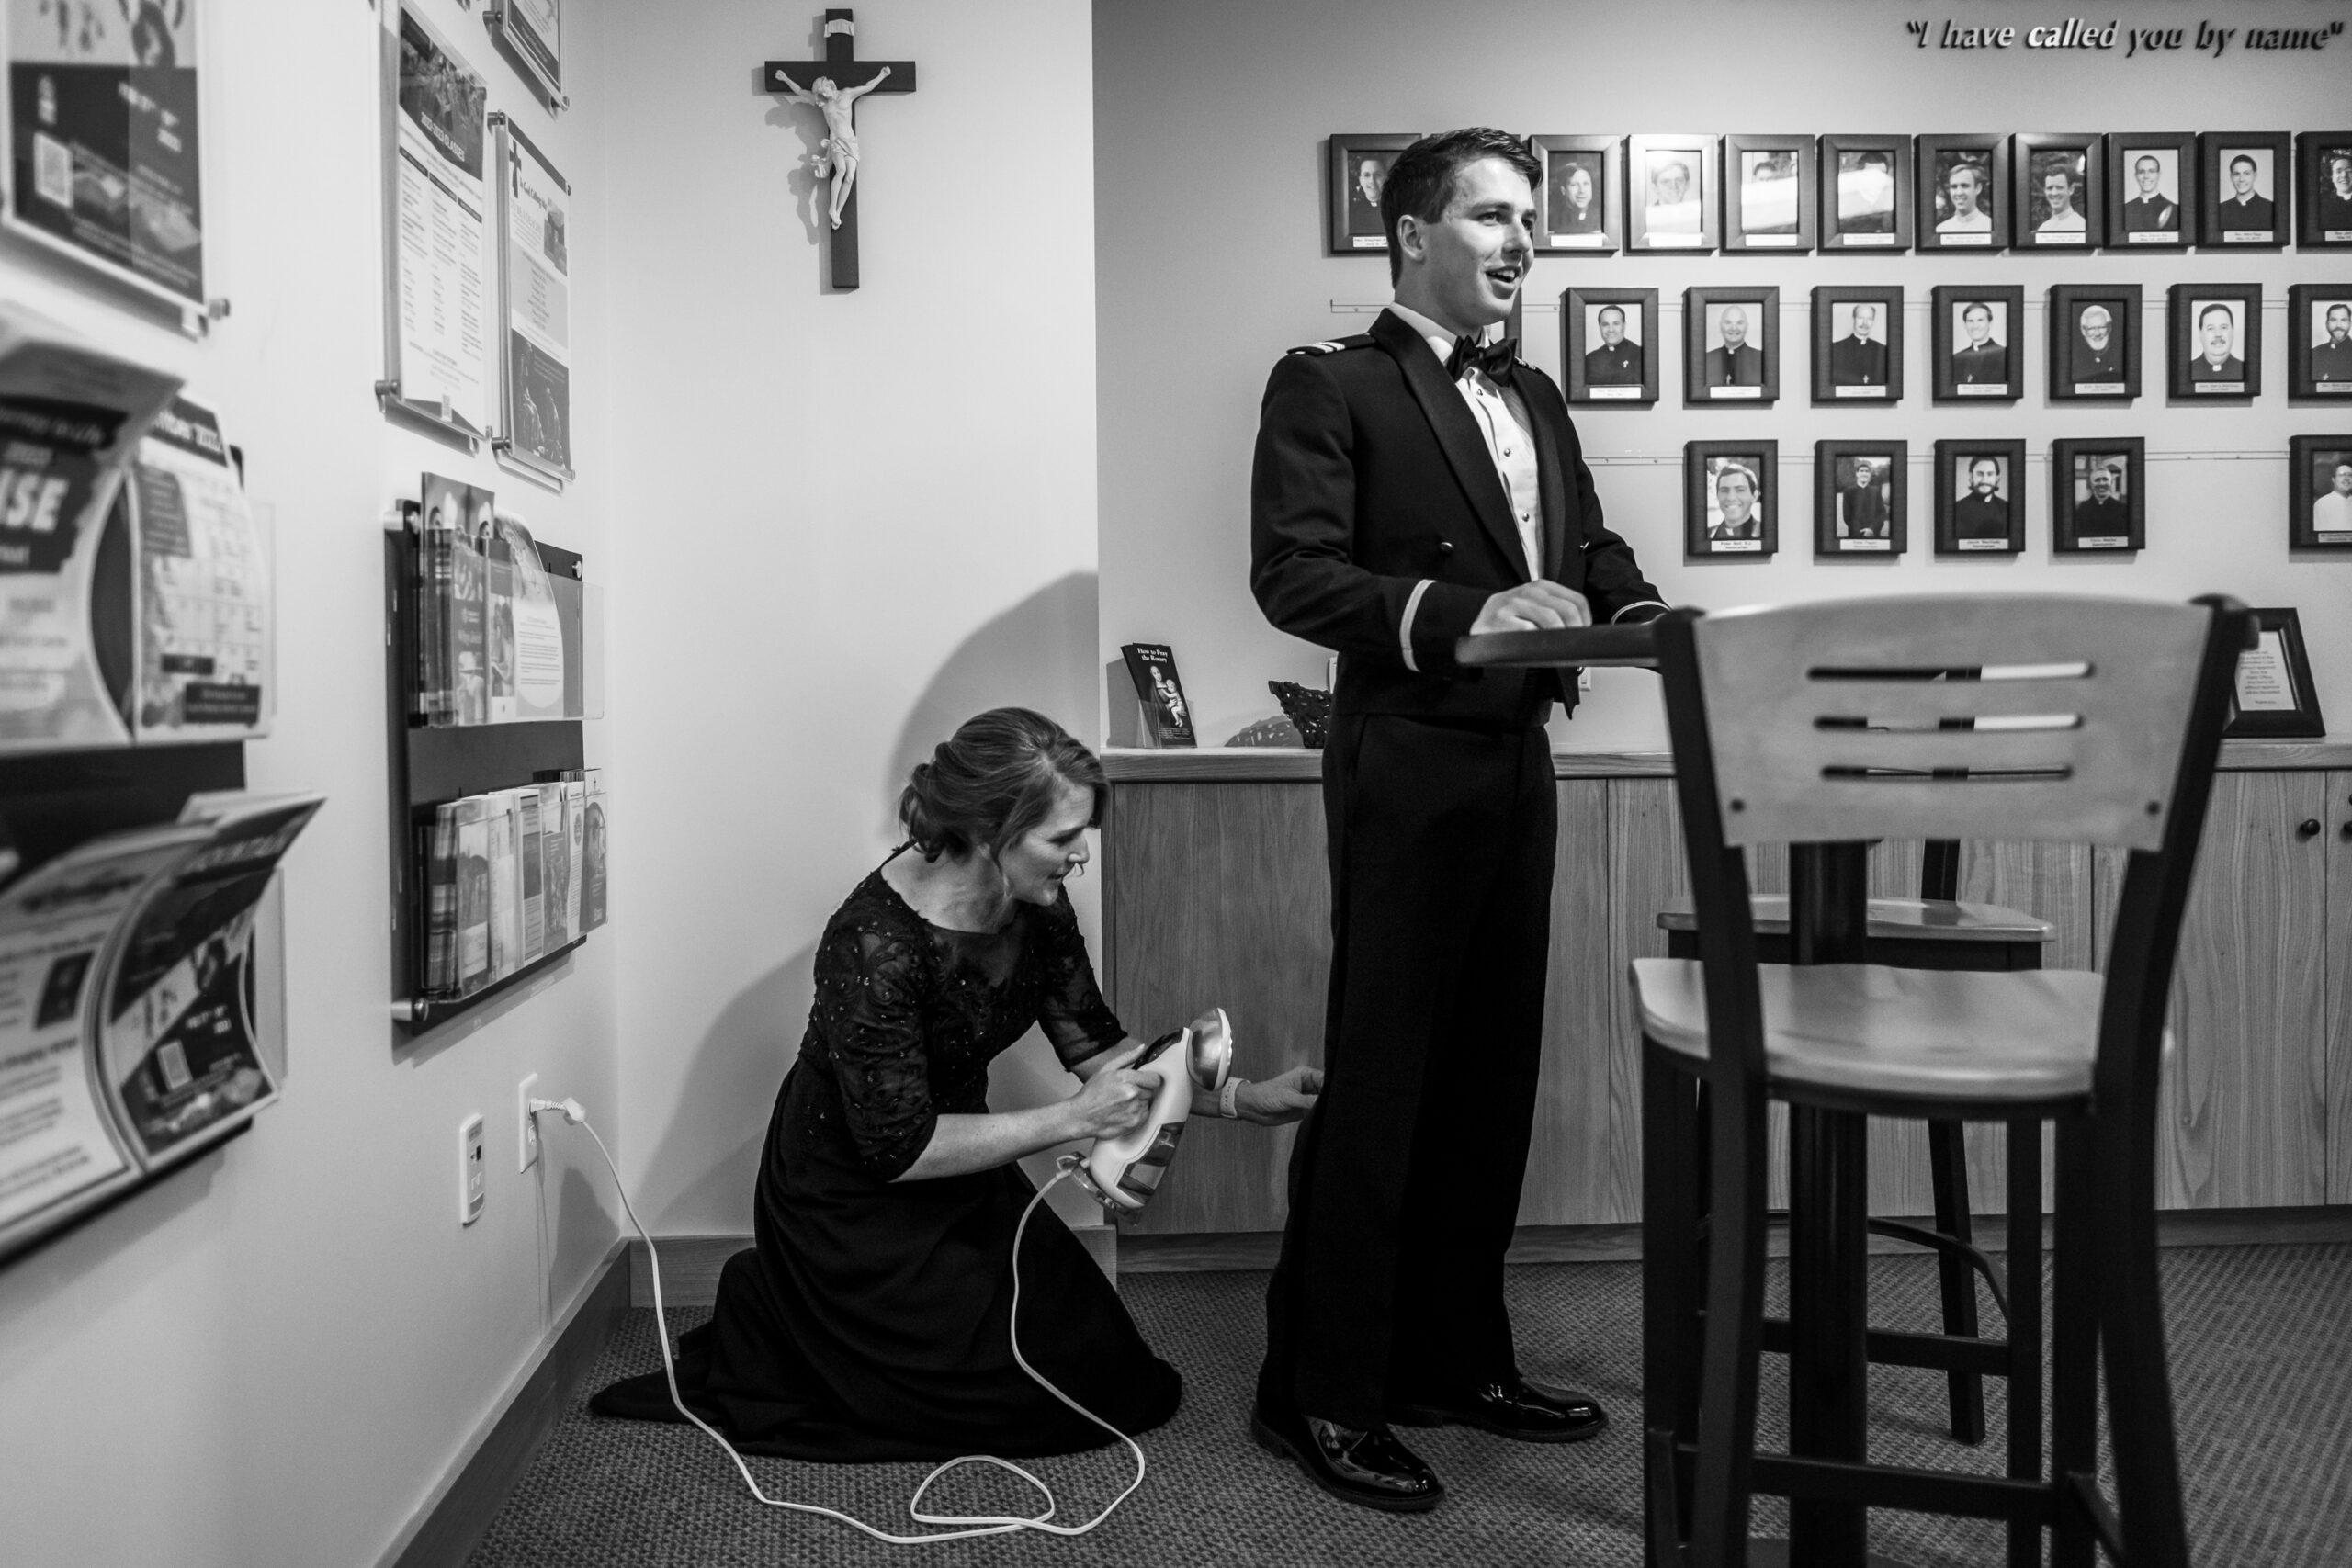 Michael's mother irons wrinkles out of his pants before a St. Thomas More Catholic Church wedding in Centennial, Colorado.